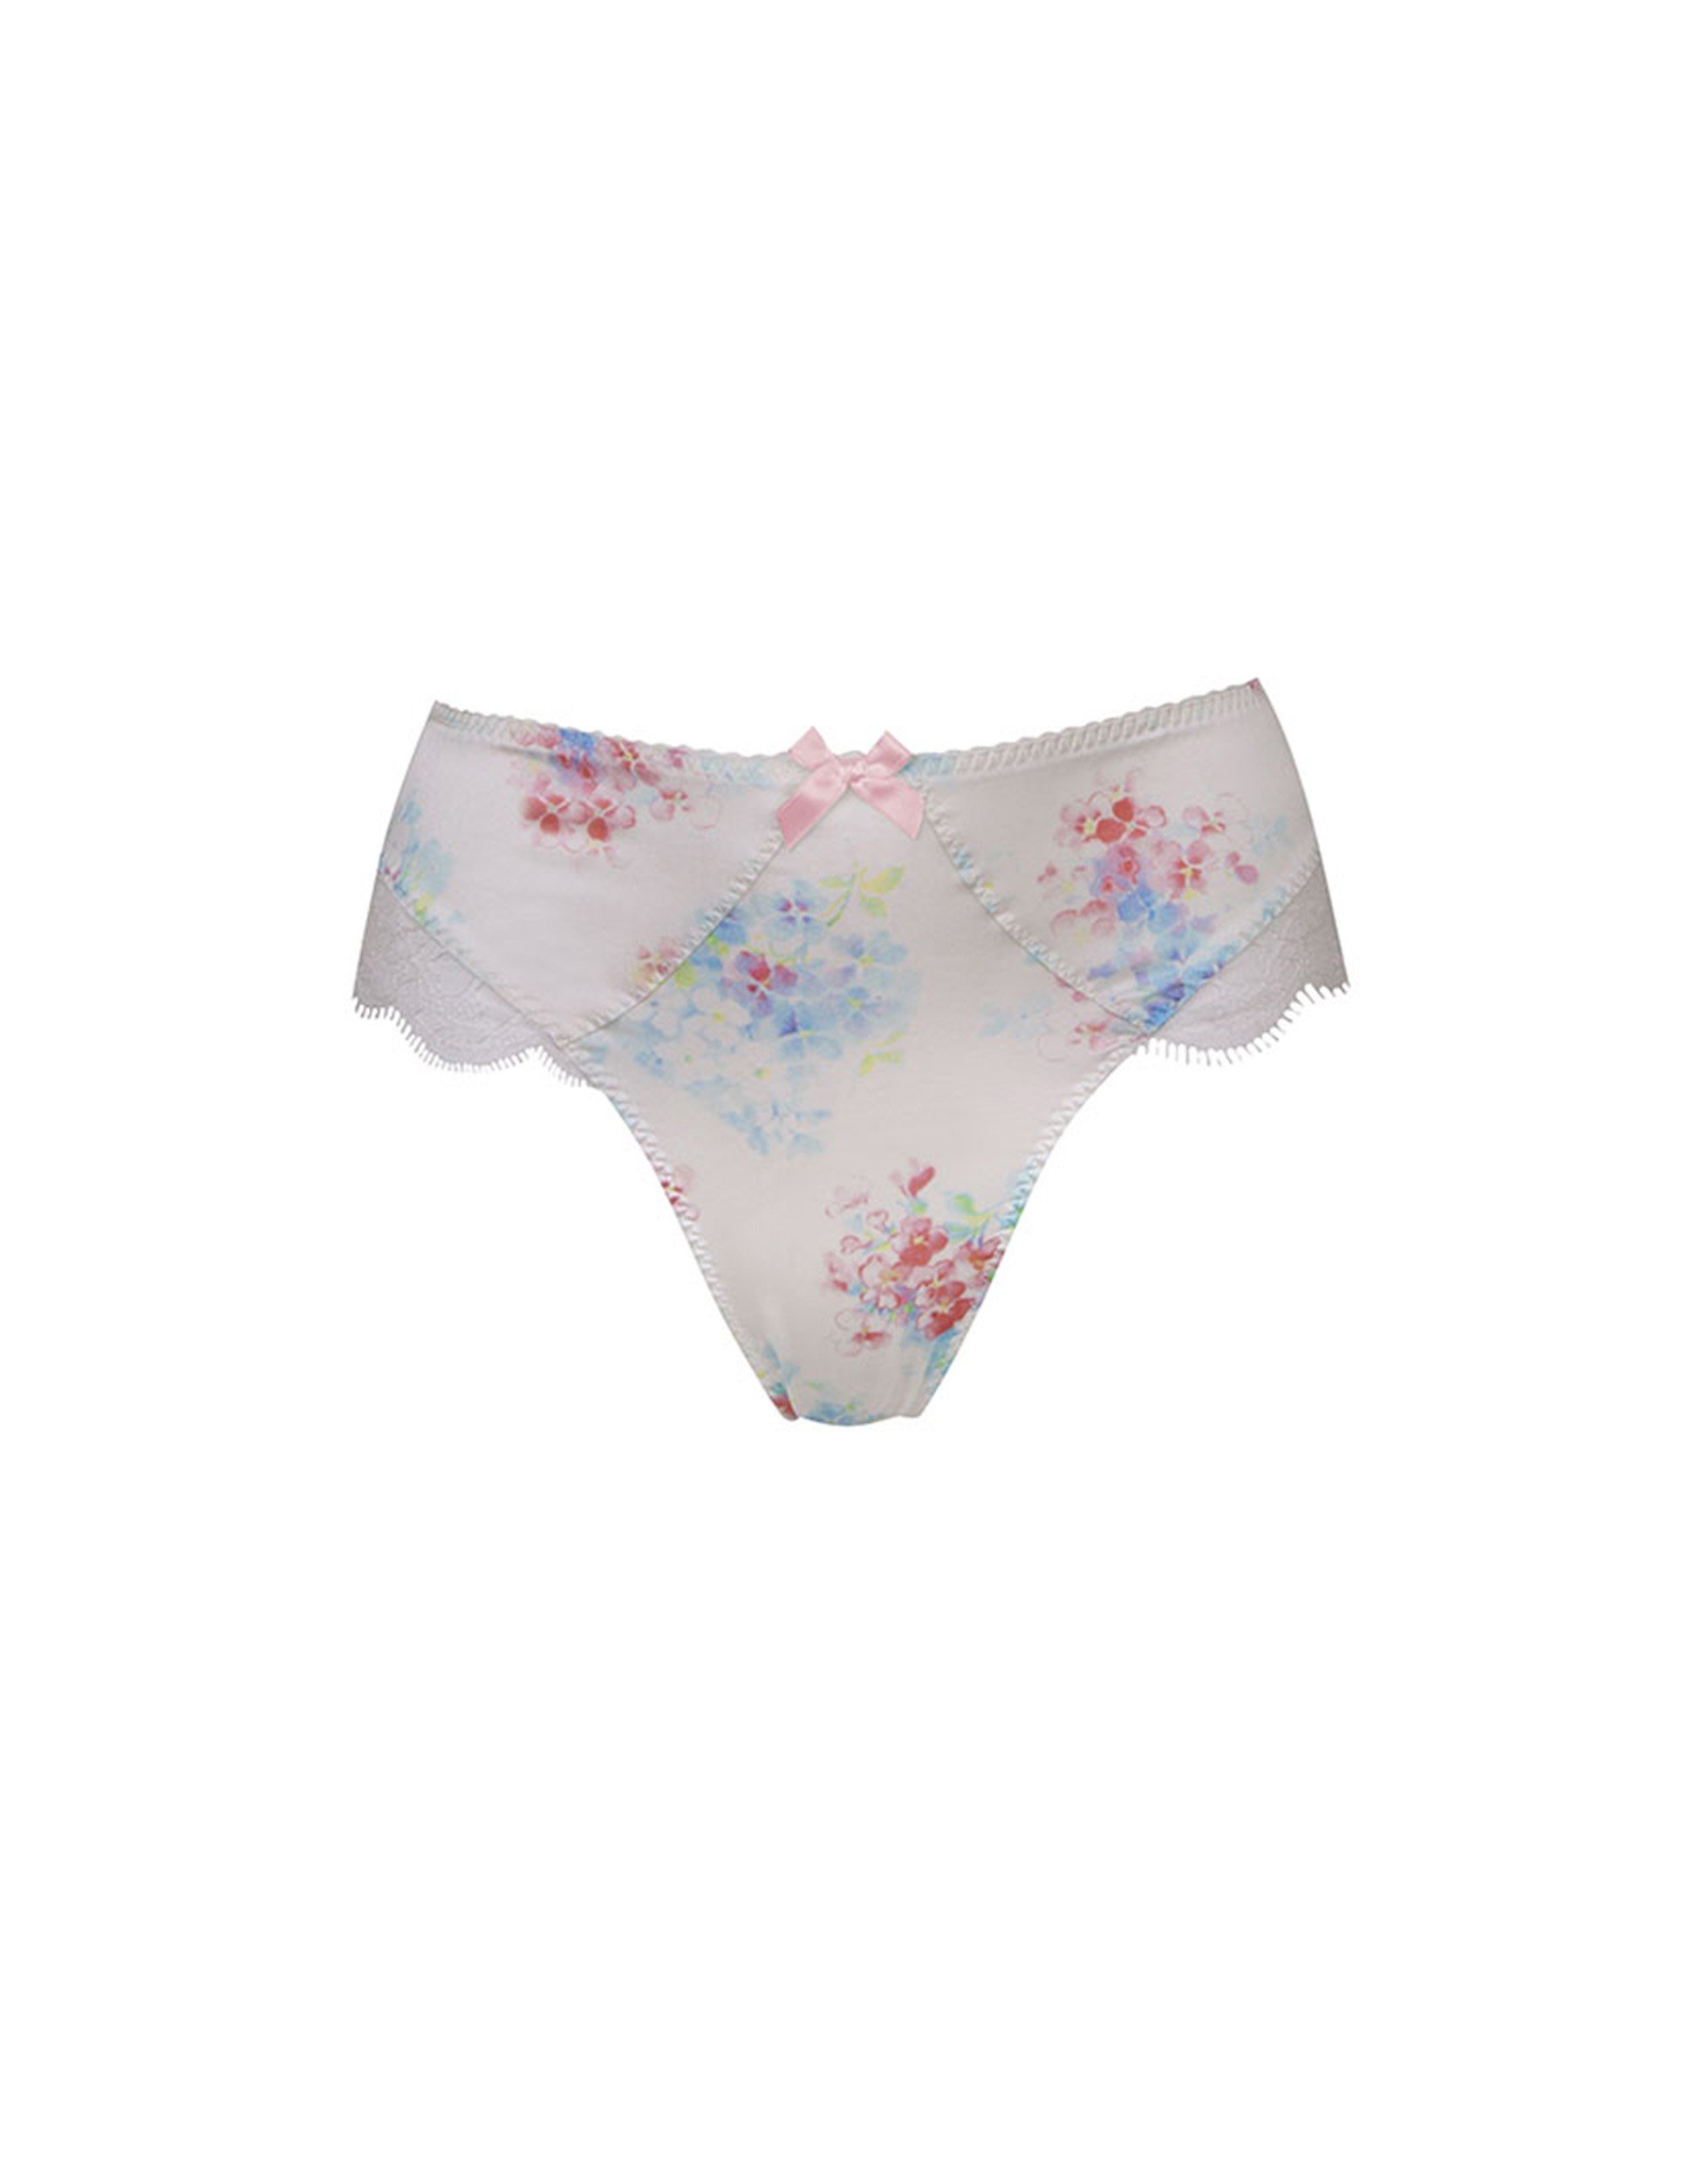 Agent Provocateur Aimeline High Waisted Thong White | 5 Star Wedding